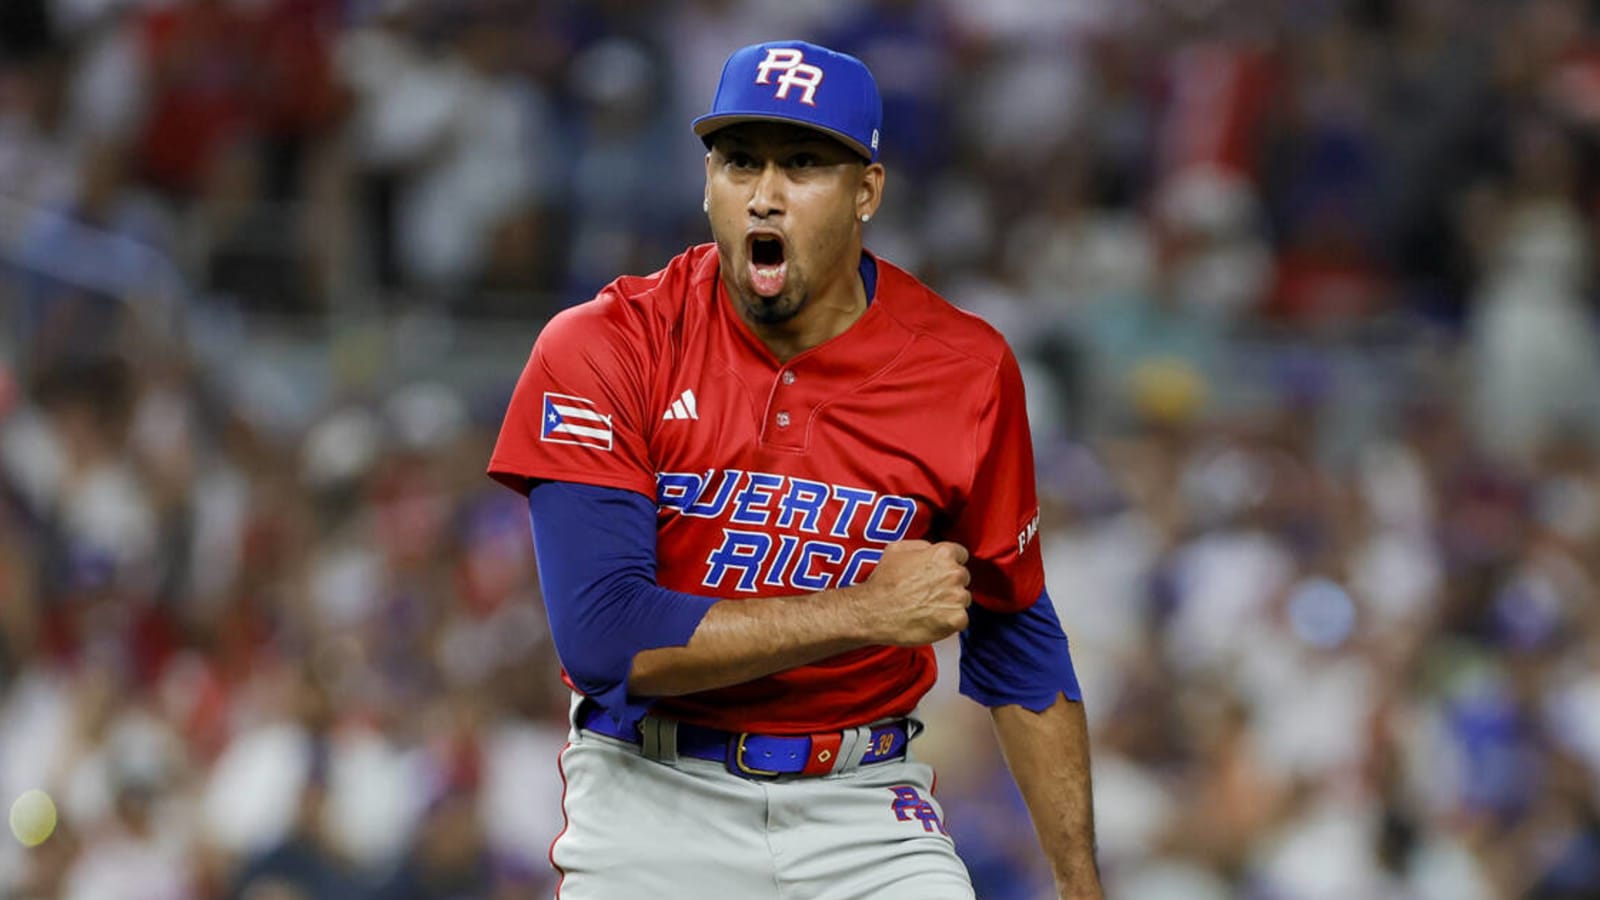 Mets' Edwin Diaz shares message to fans after injury: 'Play those